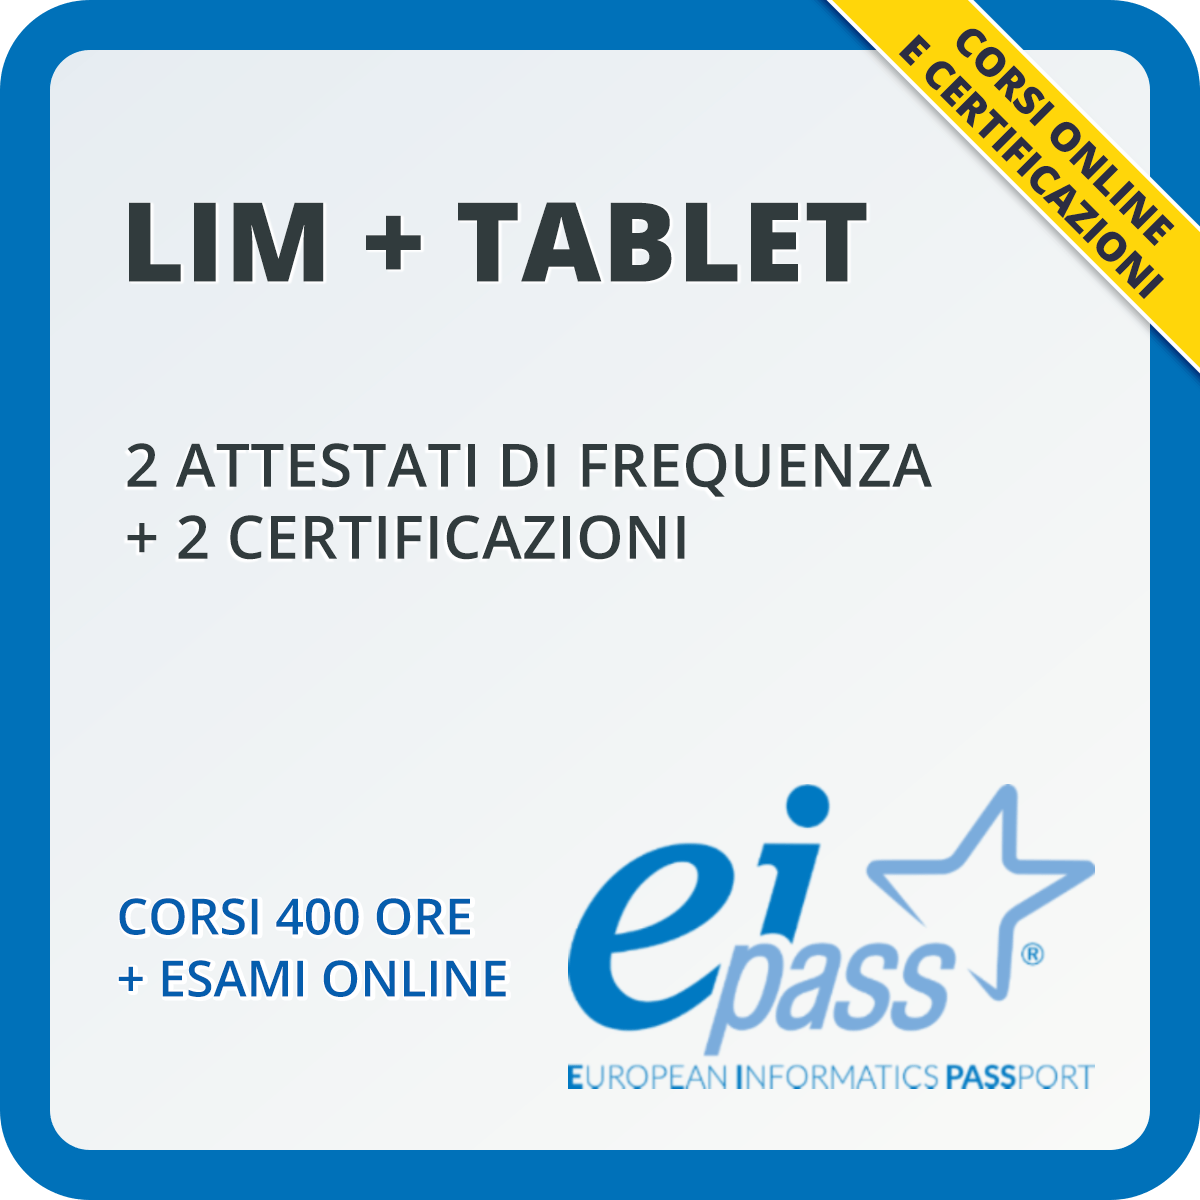 EIPASS LIM + TABLET